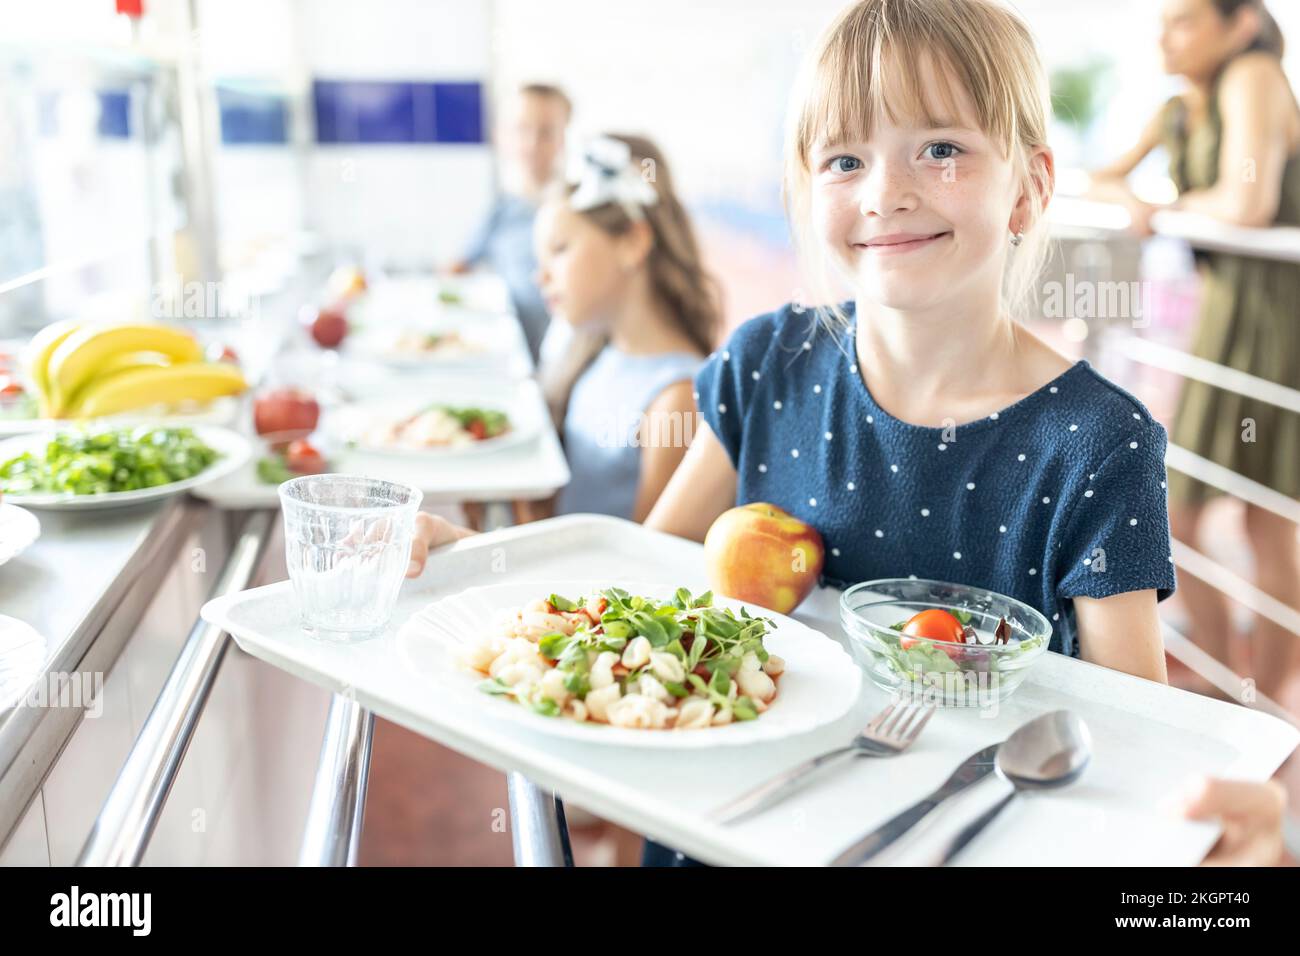 Smiling girl holding food tray in school cafeteria Stock Photo